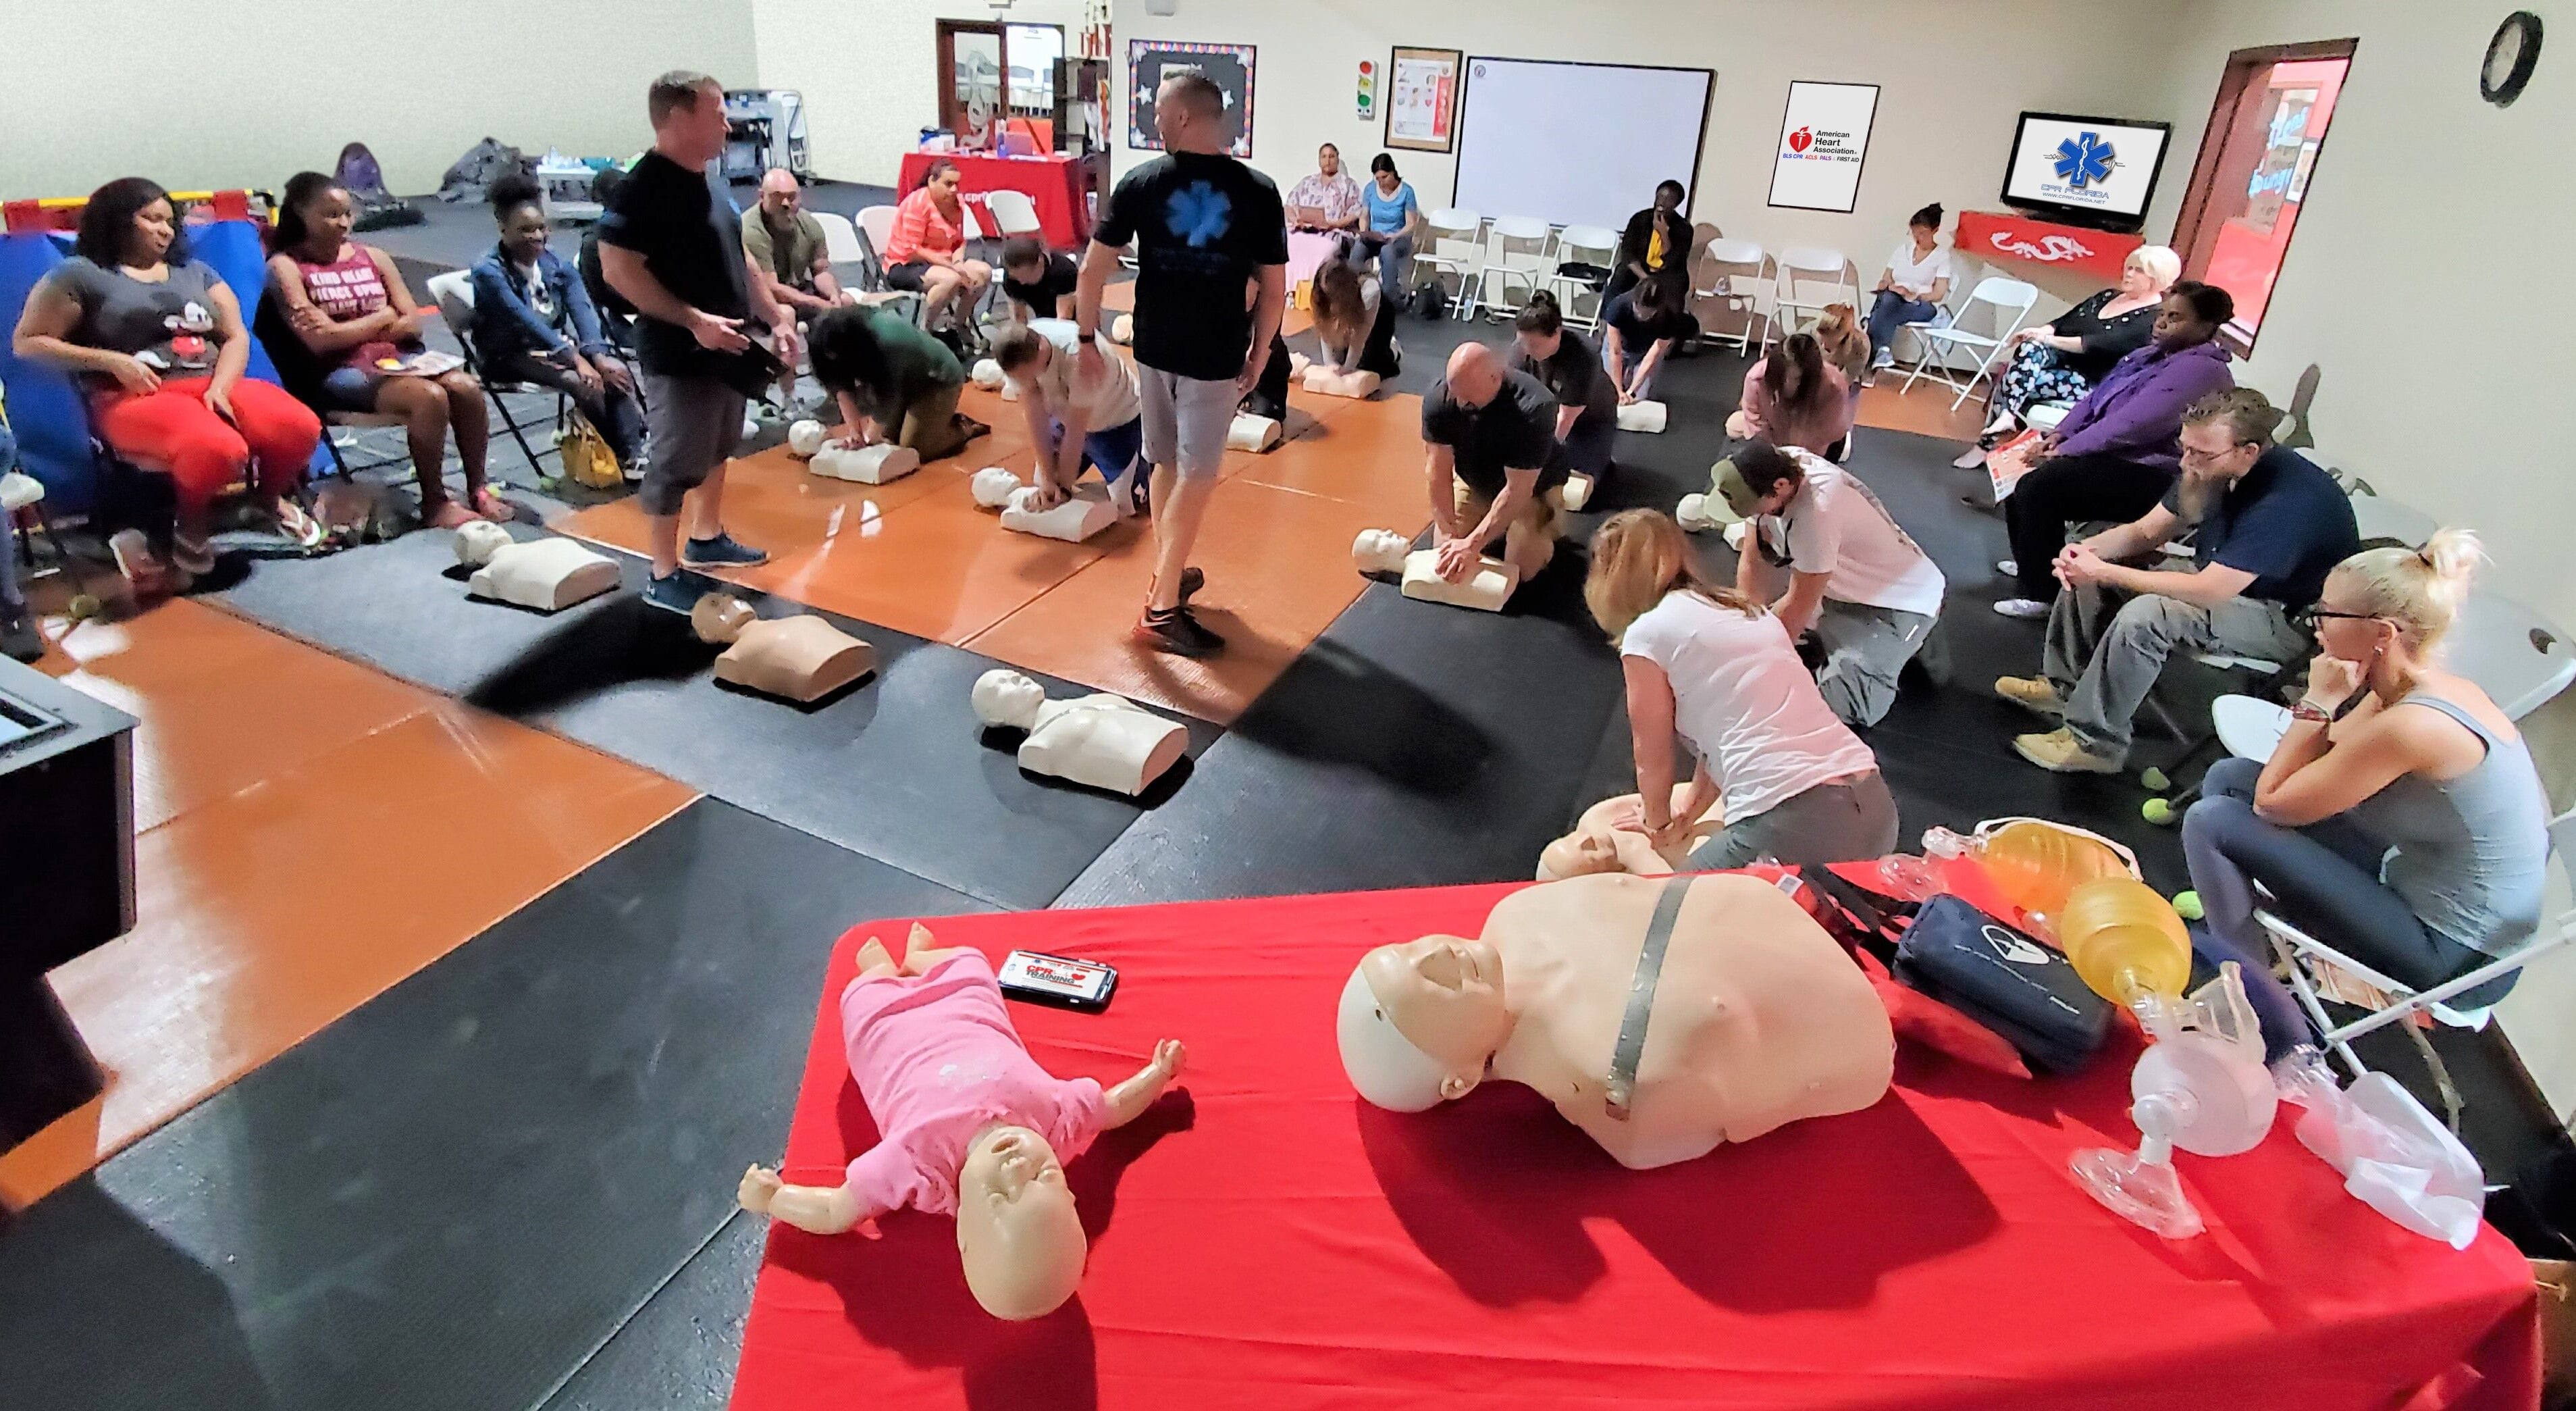 best Miami cpr bls certification classes